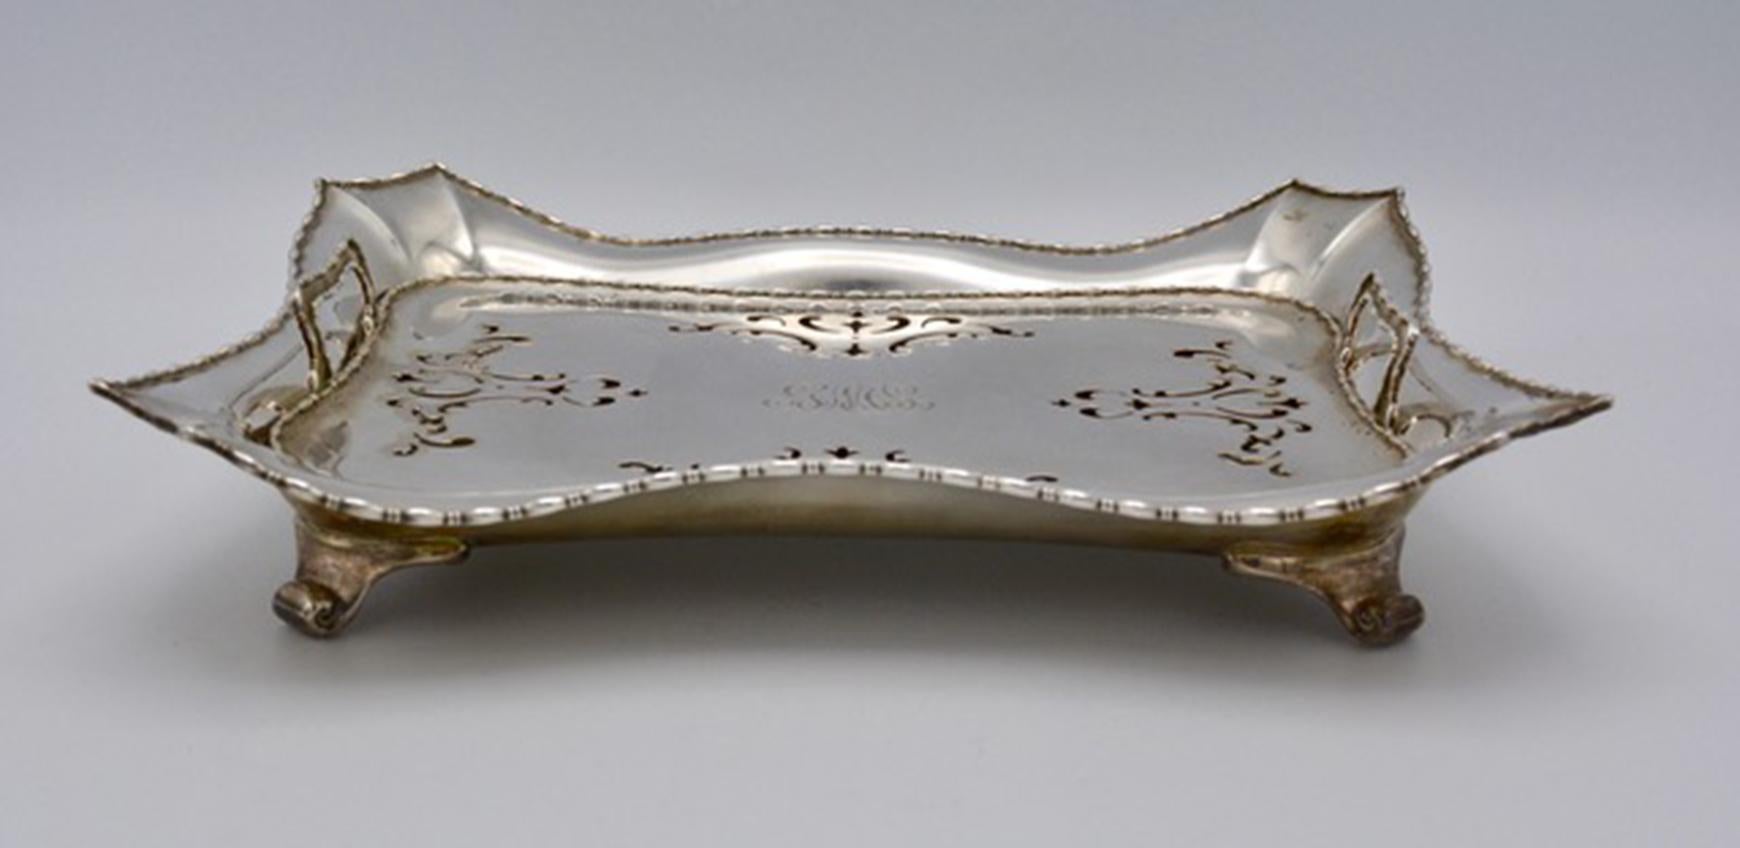 Tiffany & Co. sterling silver marquise asparagus server with pierced Insert. Scalloped rectangular form. Approximate size: 12